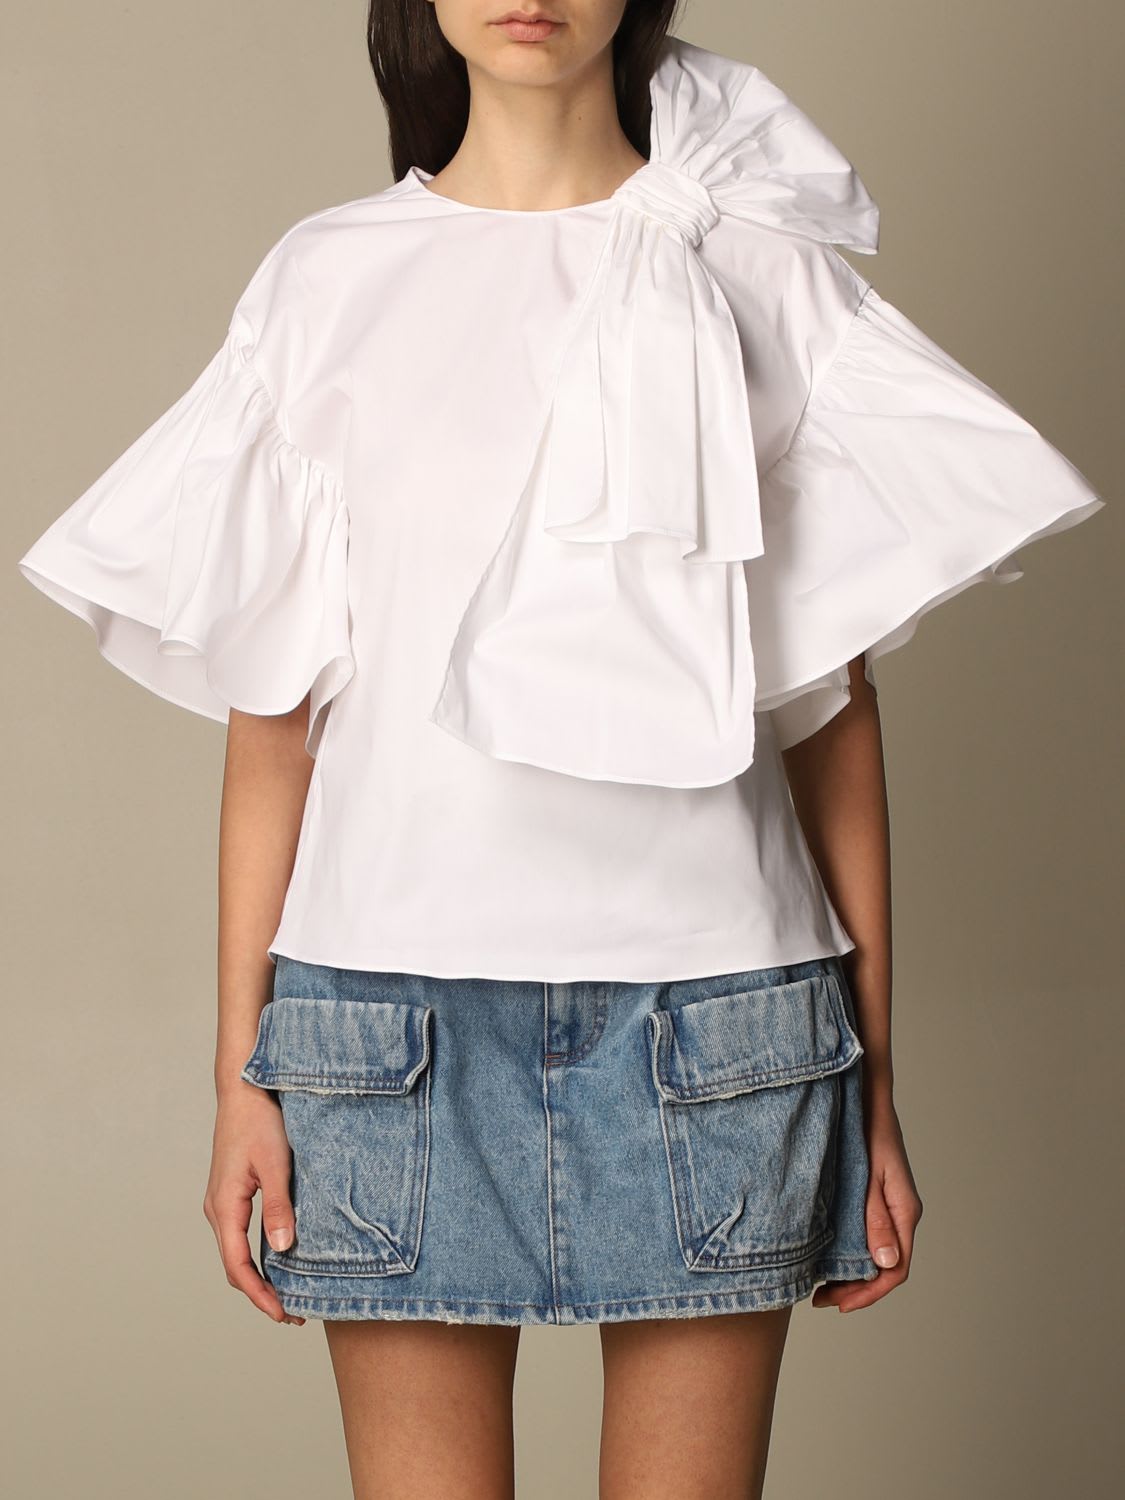 Red Valentino Top Red Valentino Top In Cotton Poplin With Ruffles